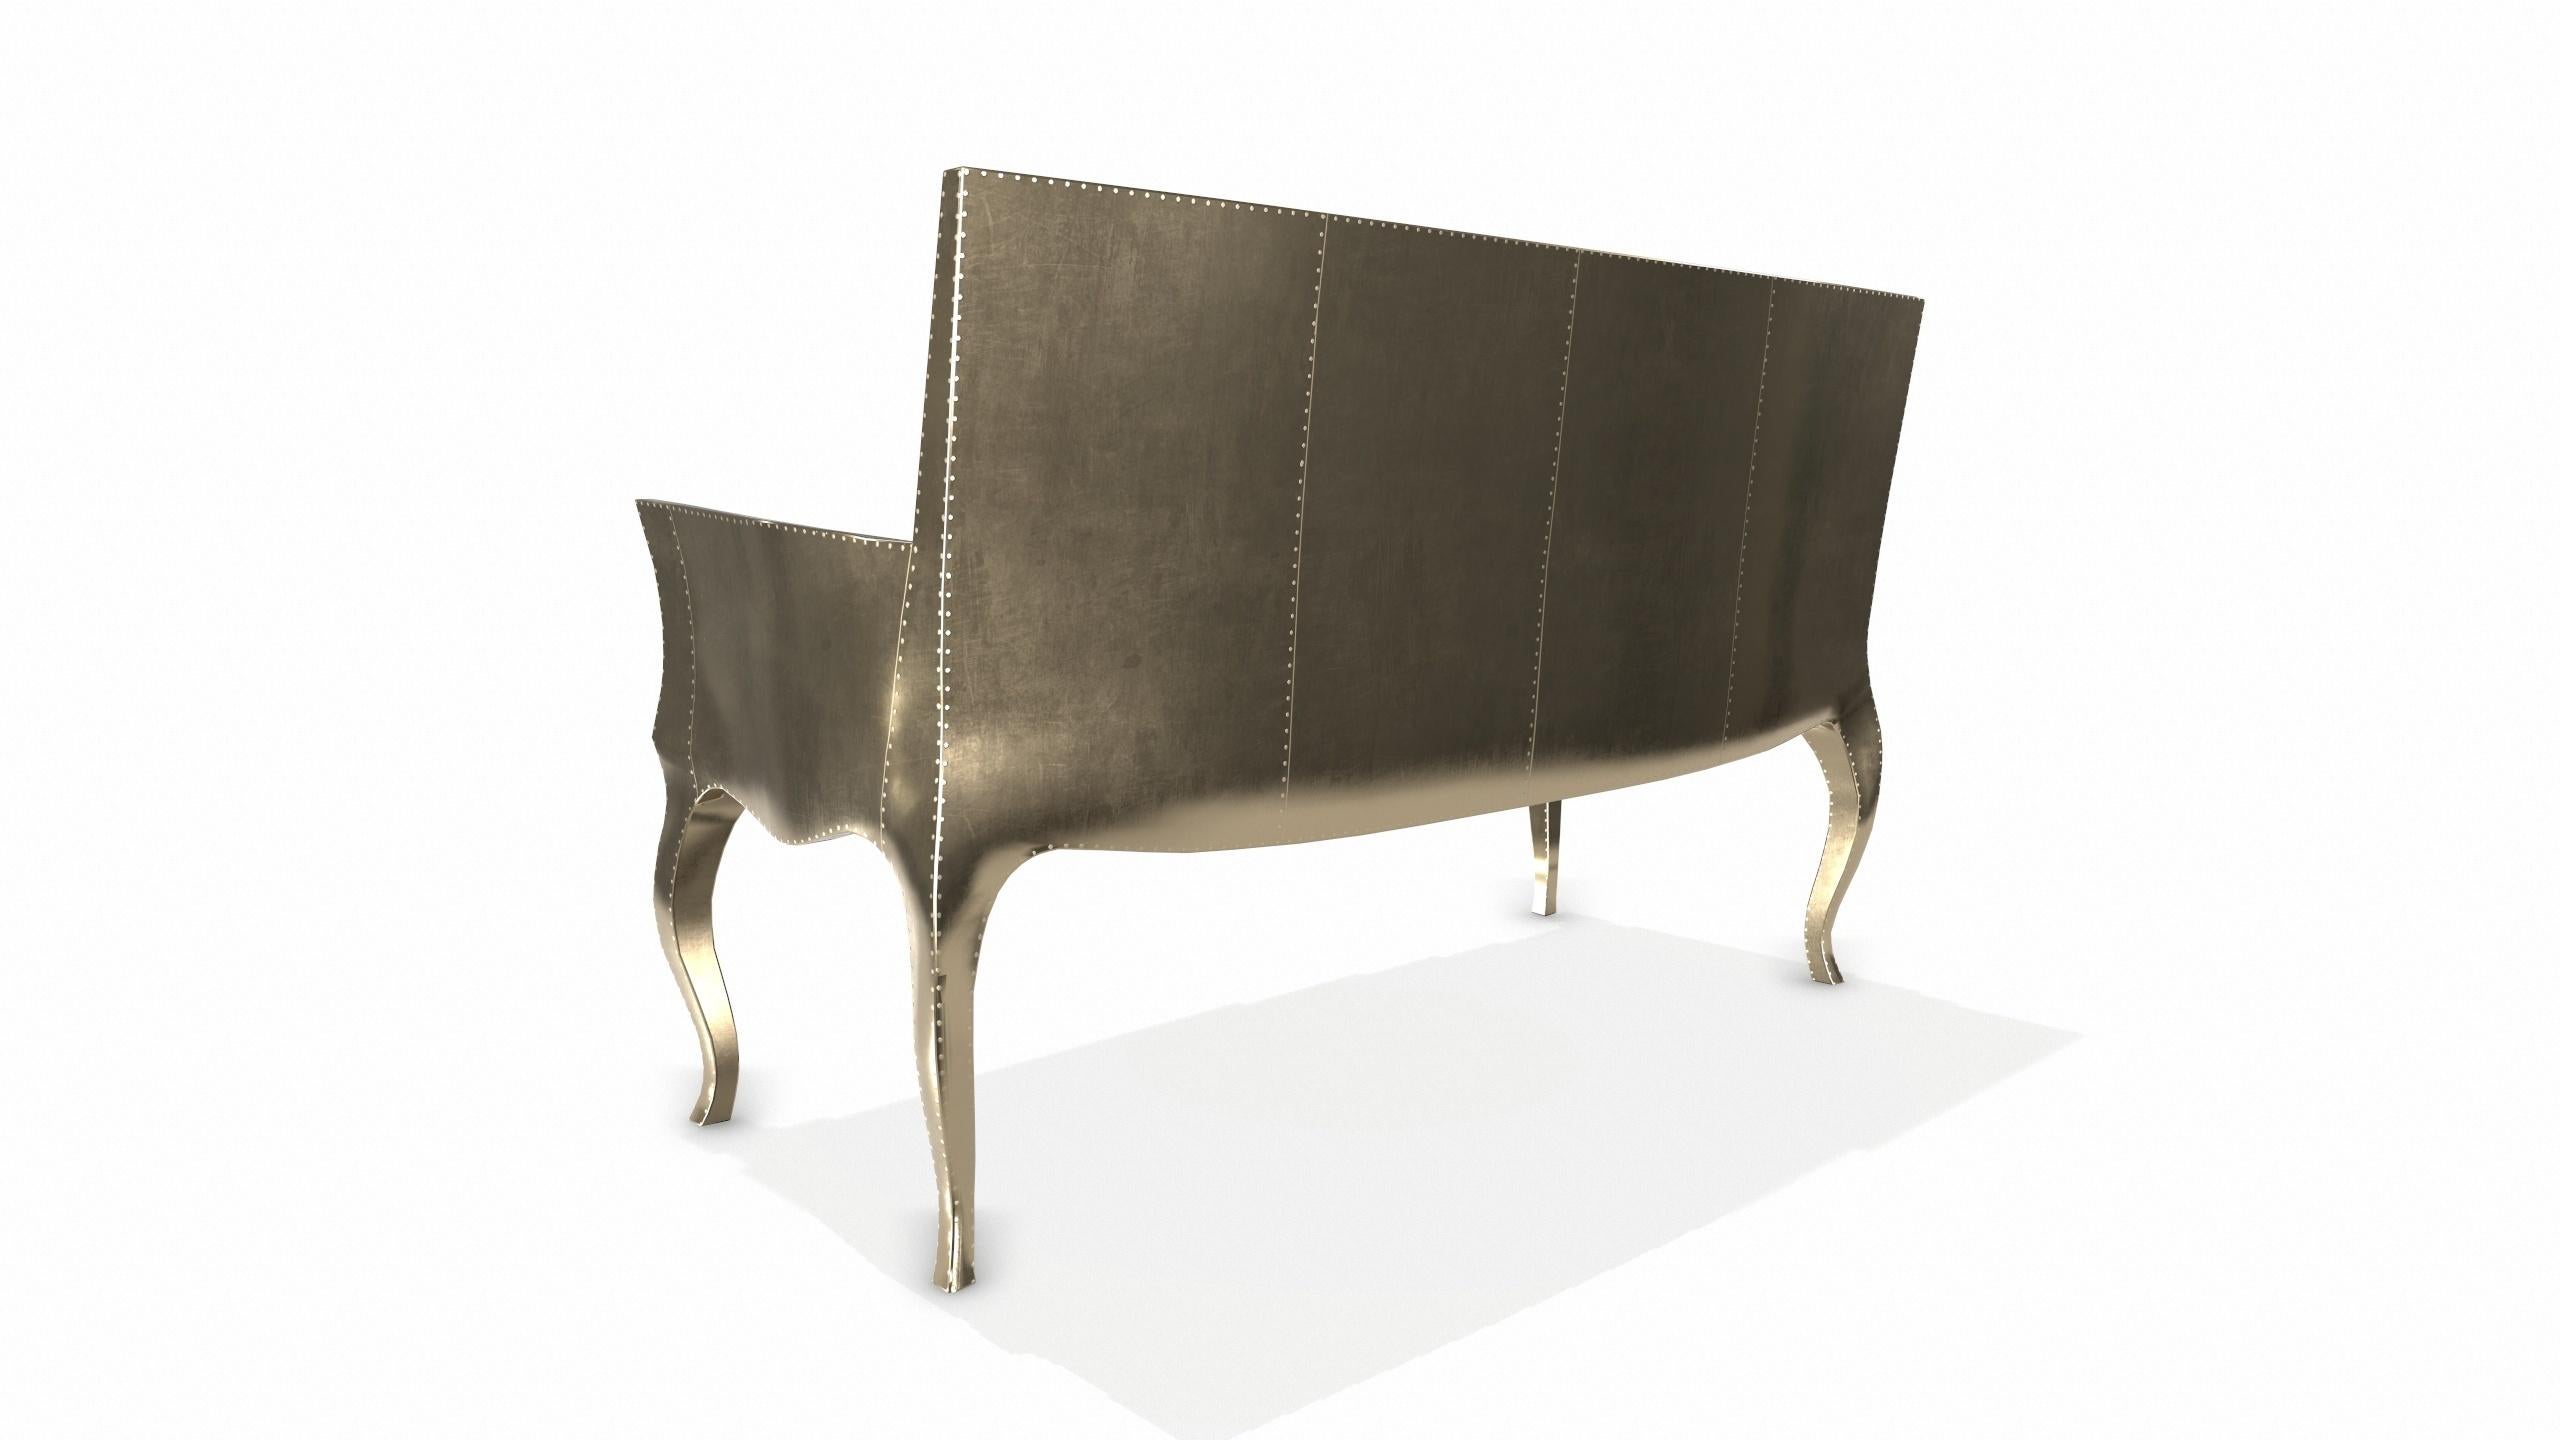 Louise Settee Art Deco Daybeds in Smooth Brass by Paul Mathieu for S Odegard For Sale 1